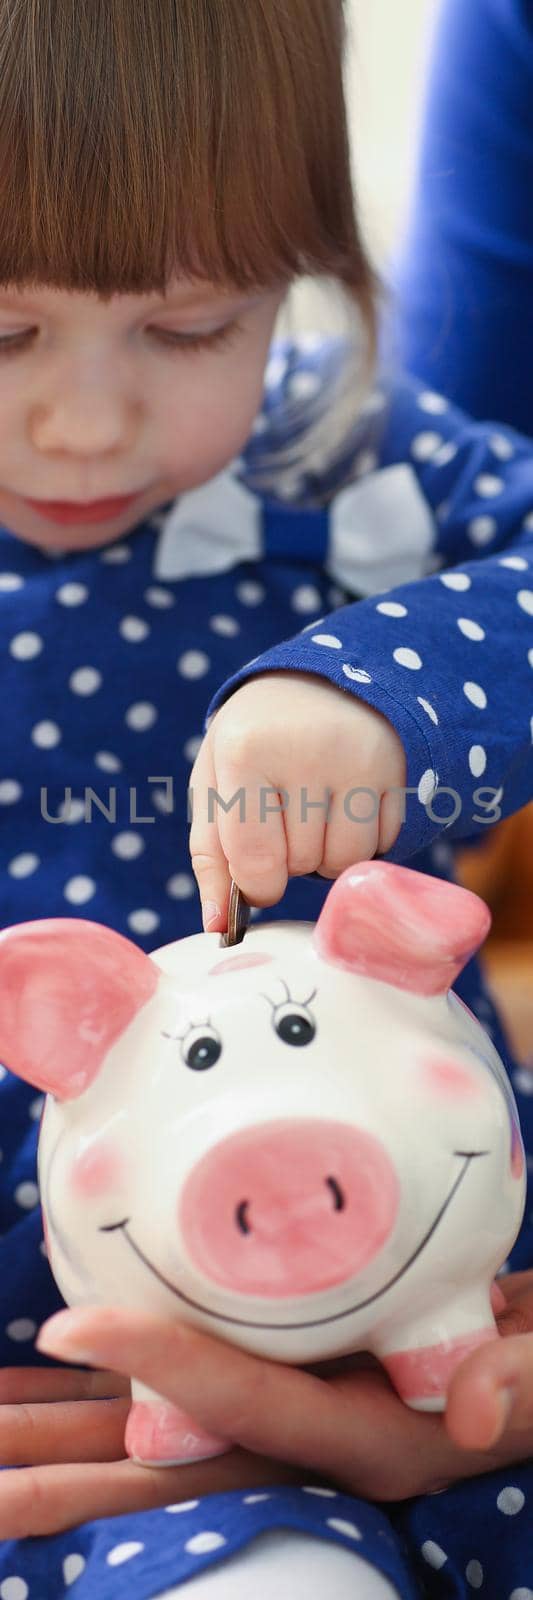 Cute little child putting coin cash into piggy bank container by kuprevich